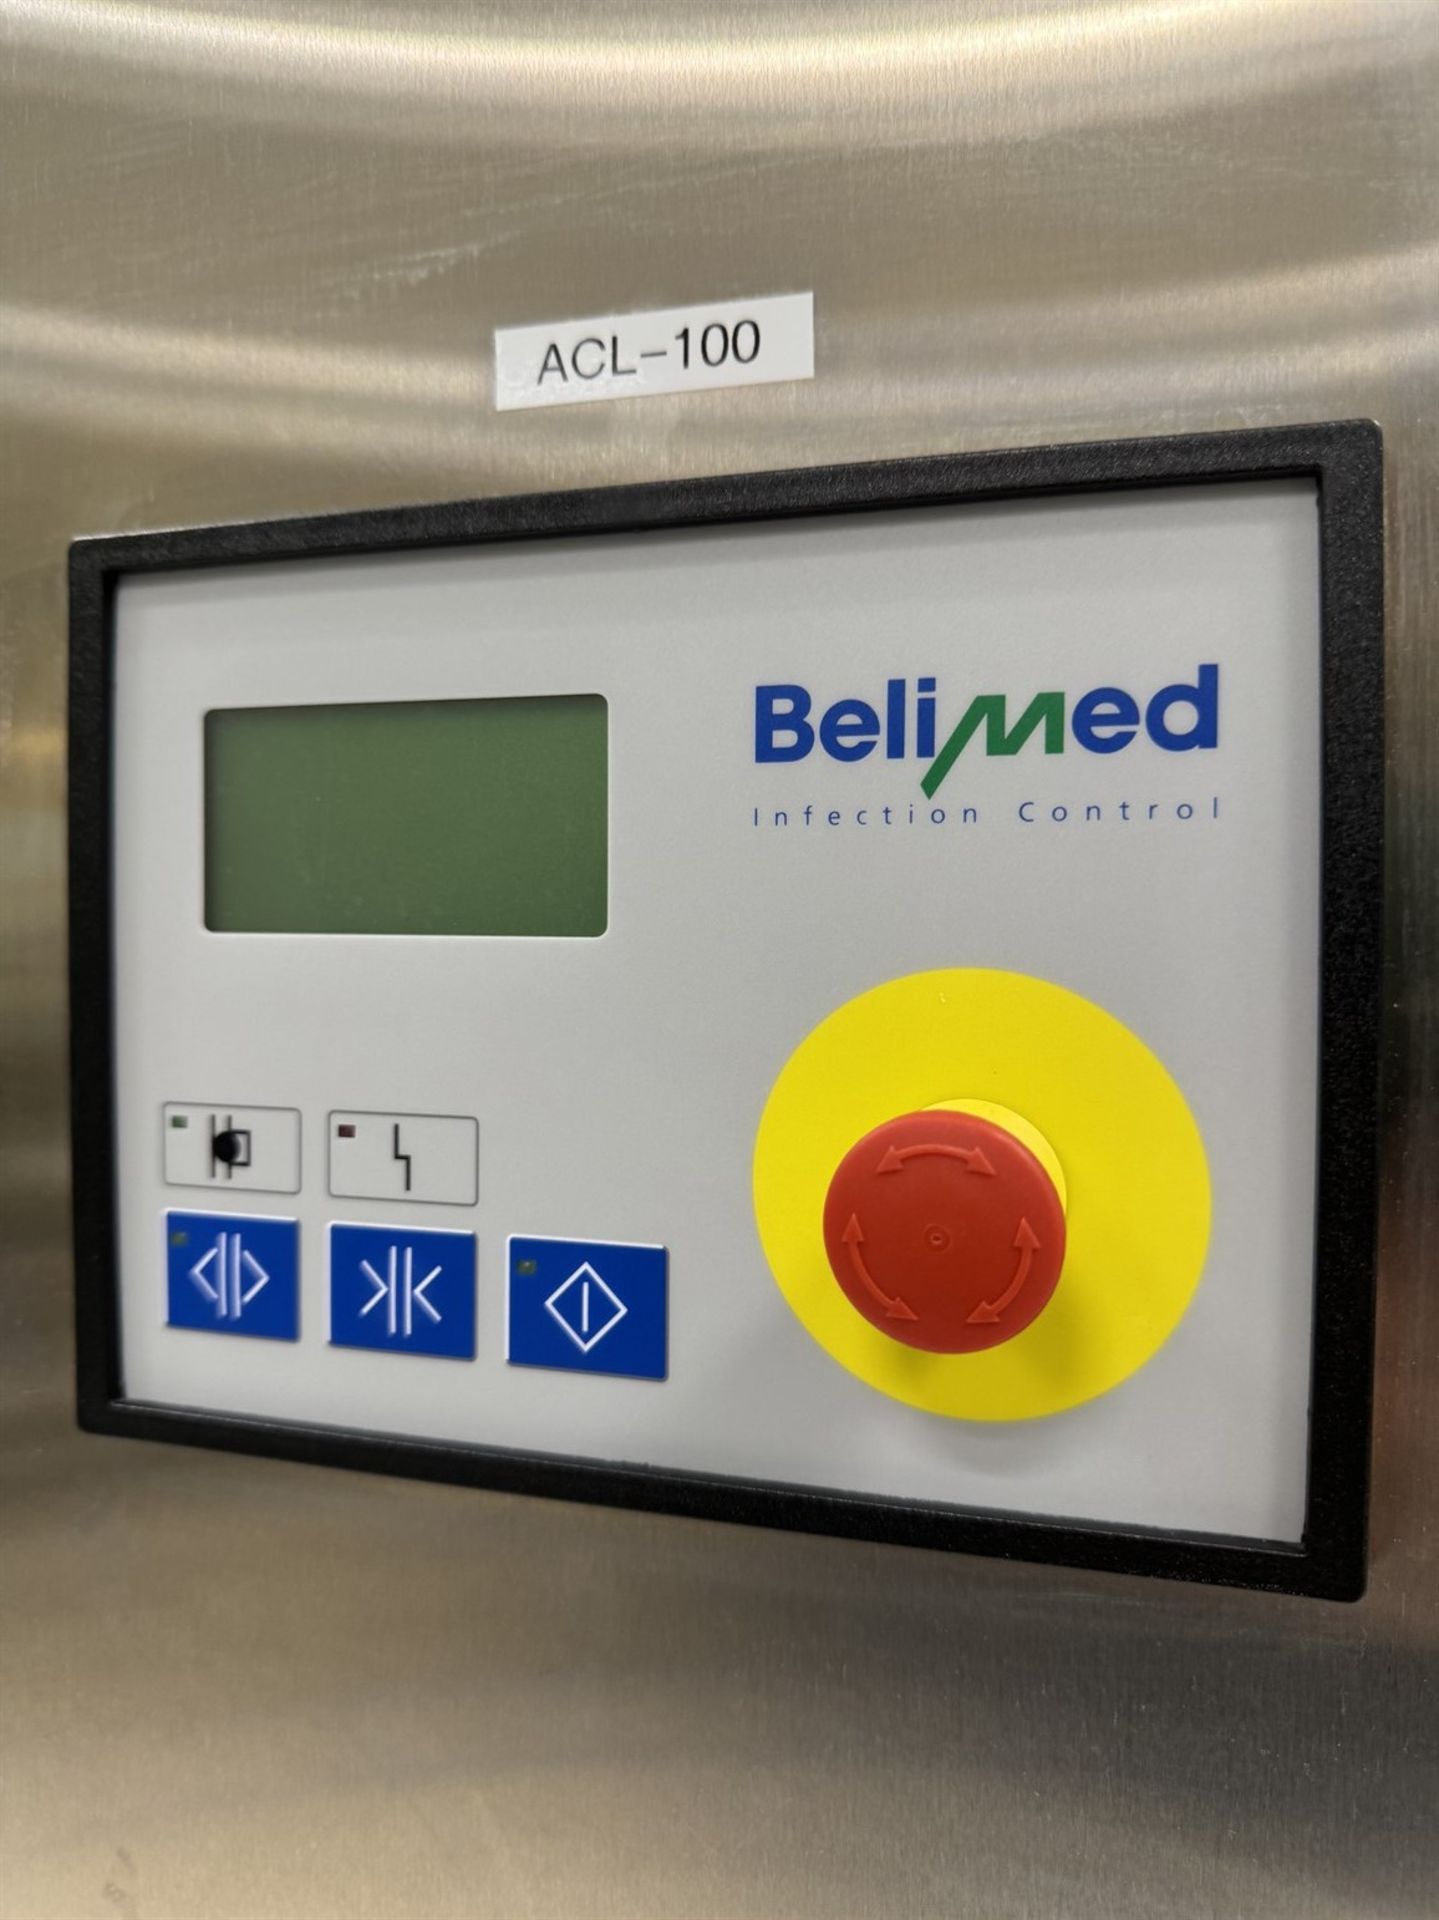 2014 BELIMED 6-6-9 HS2 Autoclave, s/n 750734, Belimed Infection Control, (2) Autoclave Loader Carts - Image 3 of 15